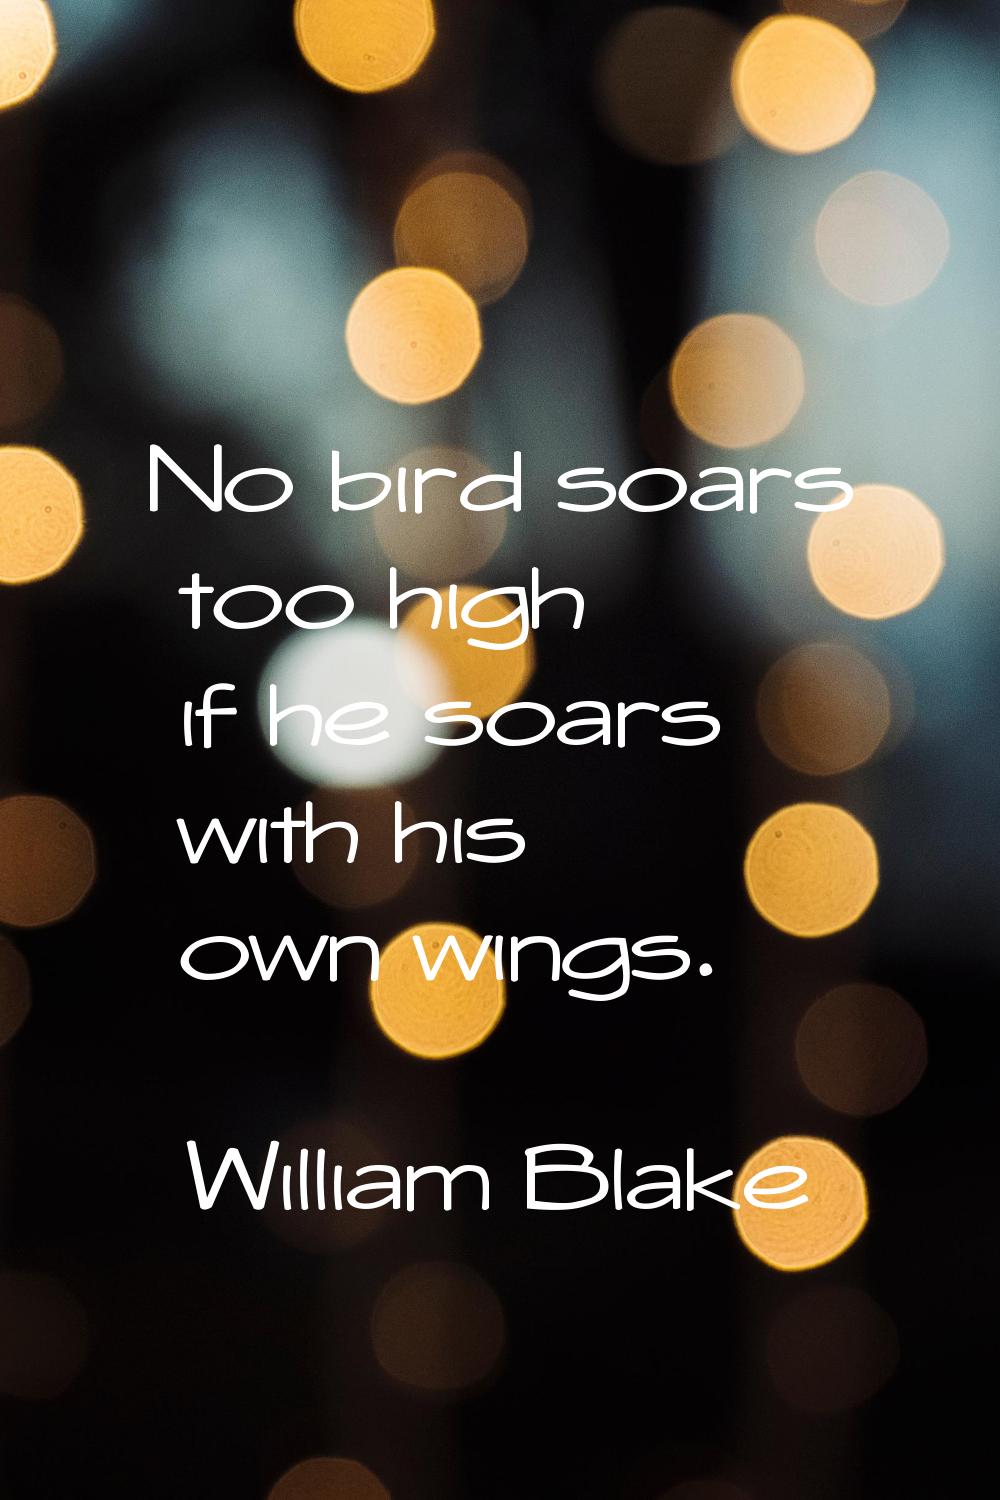 No bird soars too high if he soars with his own wings.